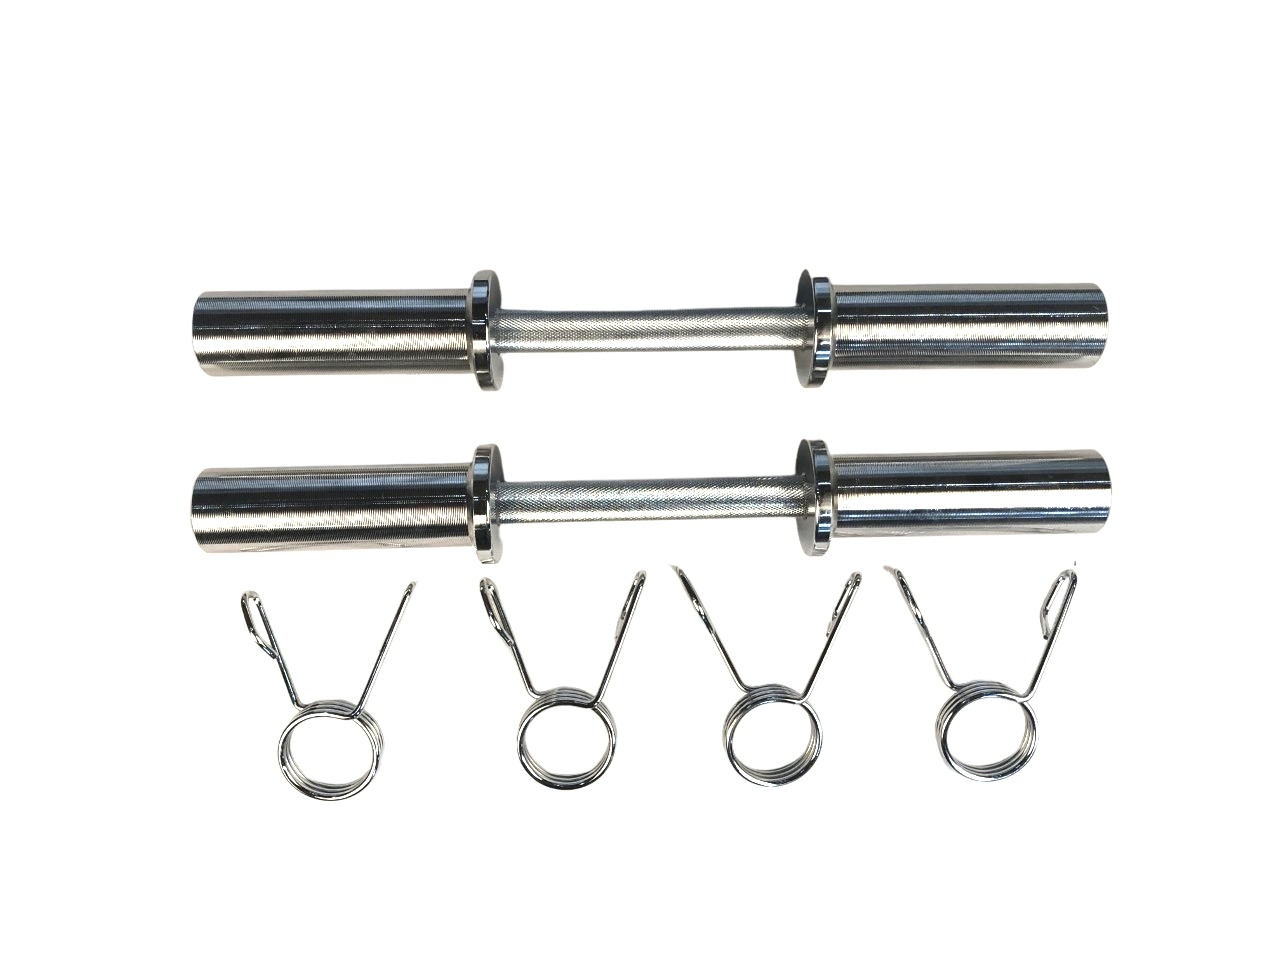 Exersci Olympic Dumbbell Bars (Pair)